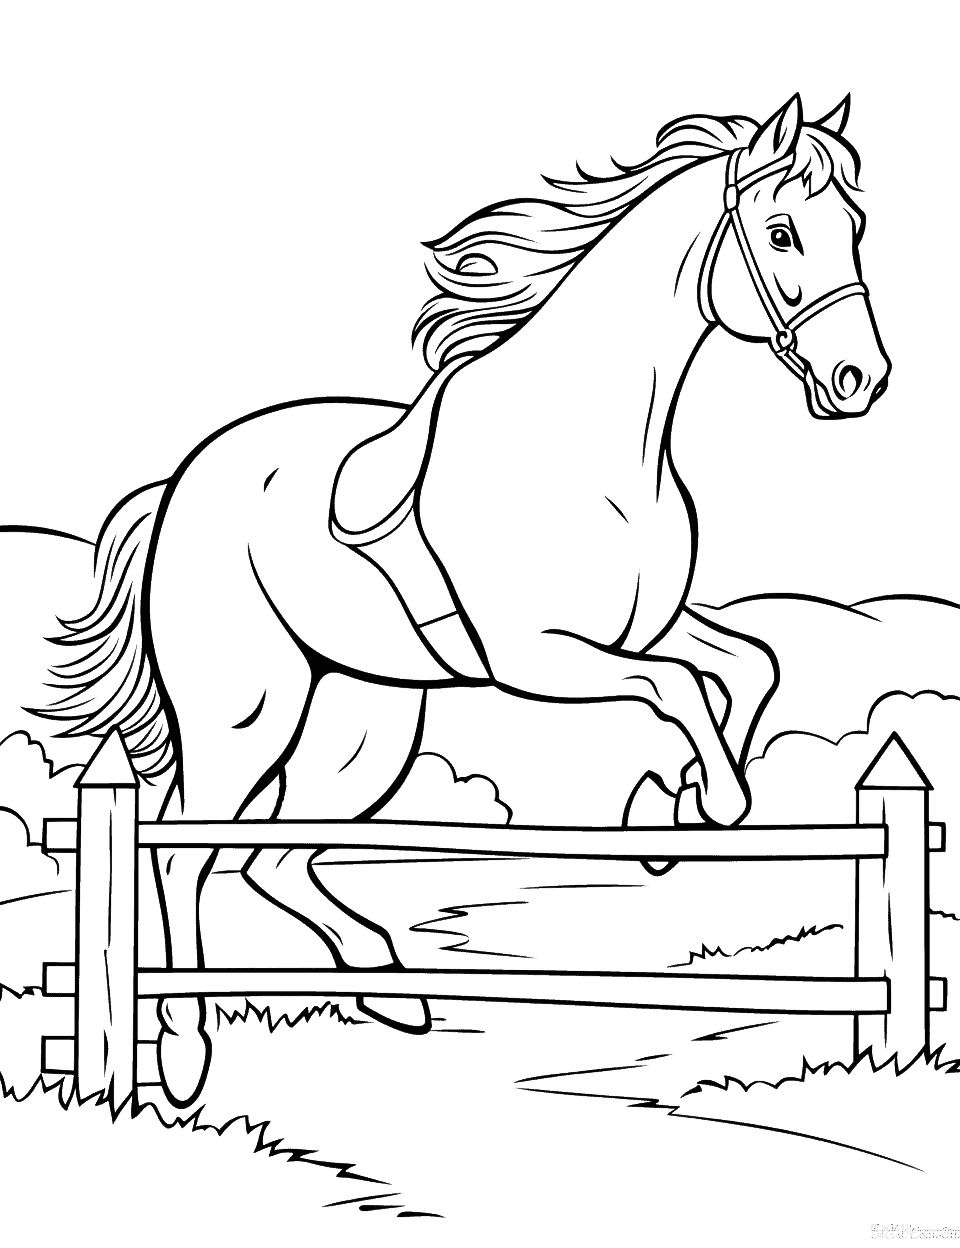 Horse Jumping Over a Hurdle Coloring Page - An equestrian scene featuring a horse and its rider jumping over a hurdle.